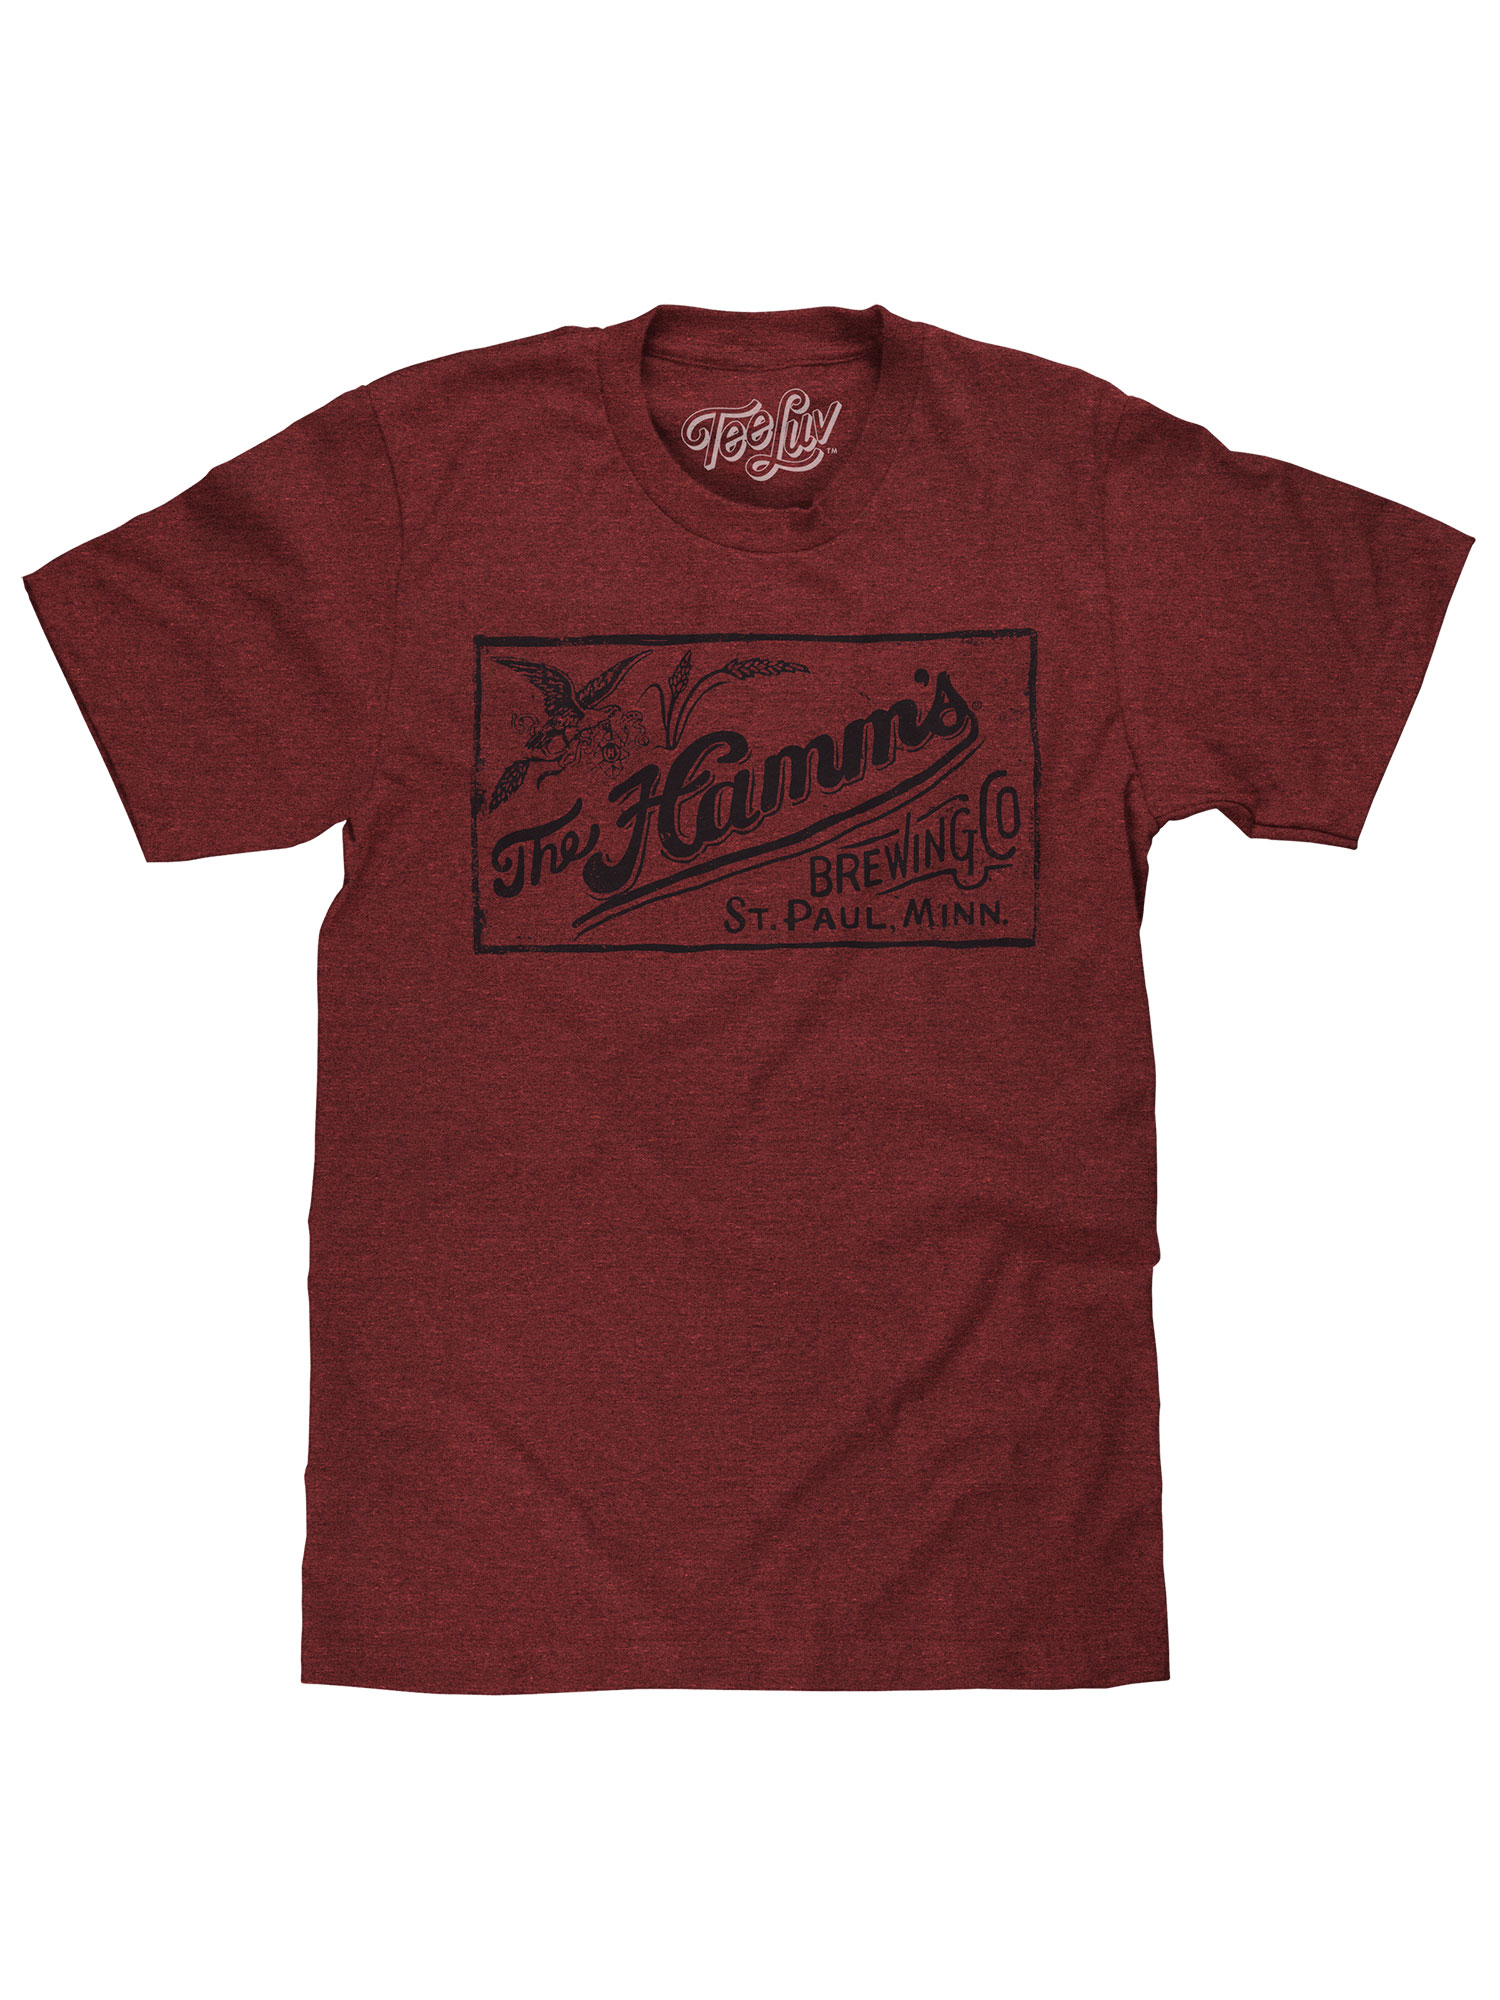 Tee Luv Men's Hamm's Brewing Company Faded Beer Logo Shirt (S) - image 1 of 7